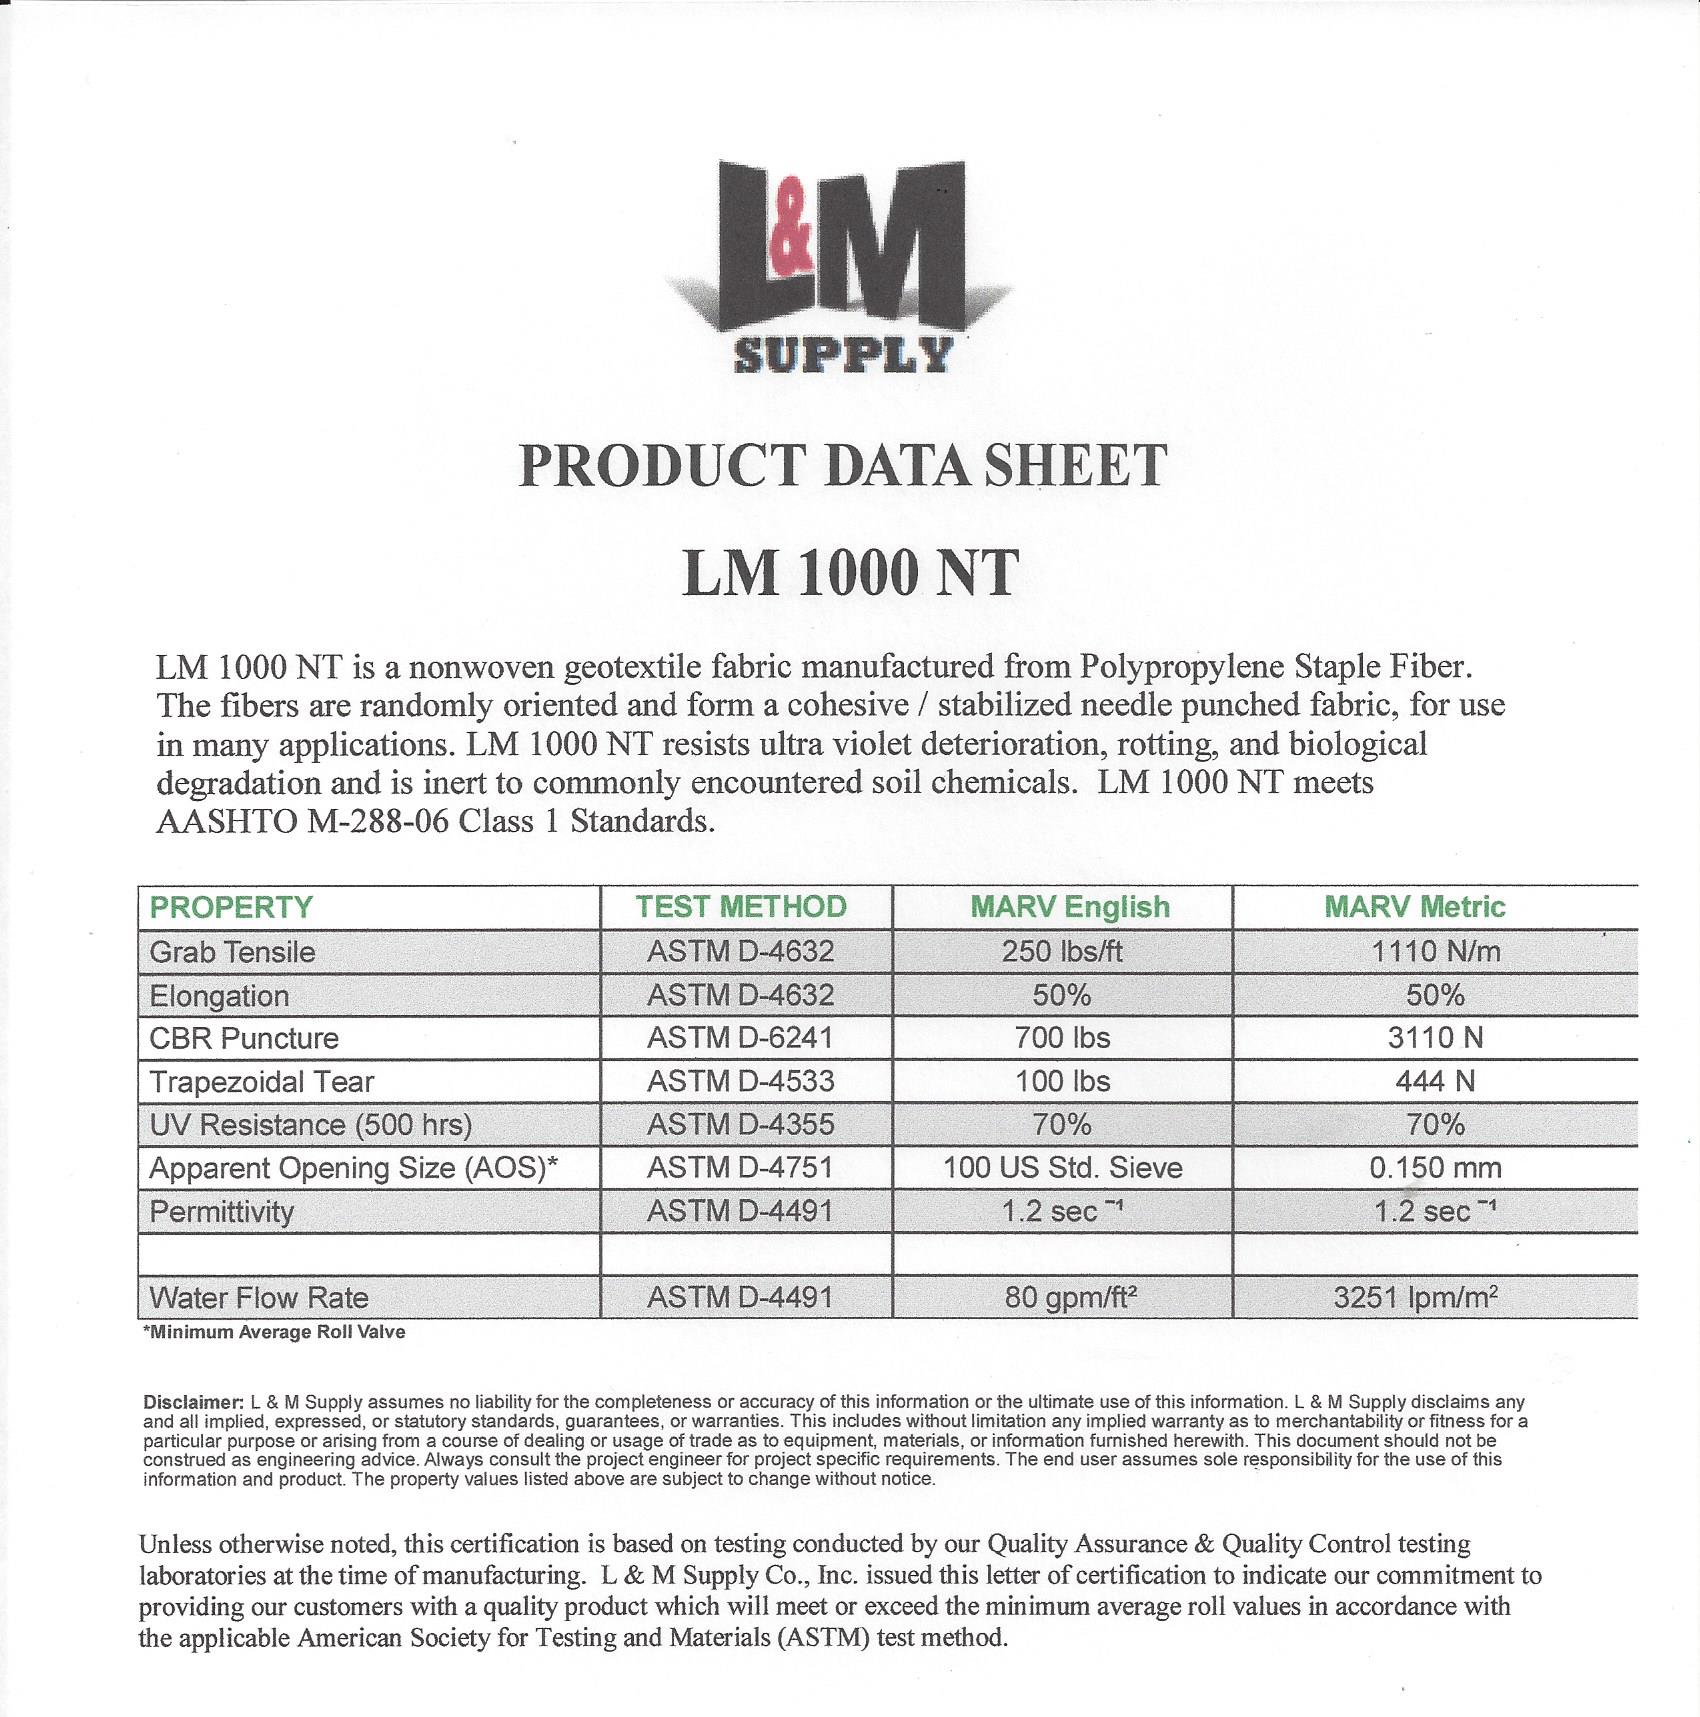 LM 1000 NT